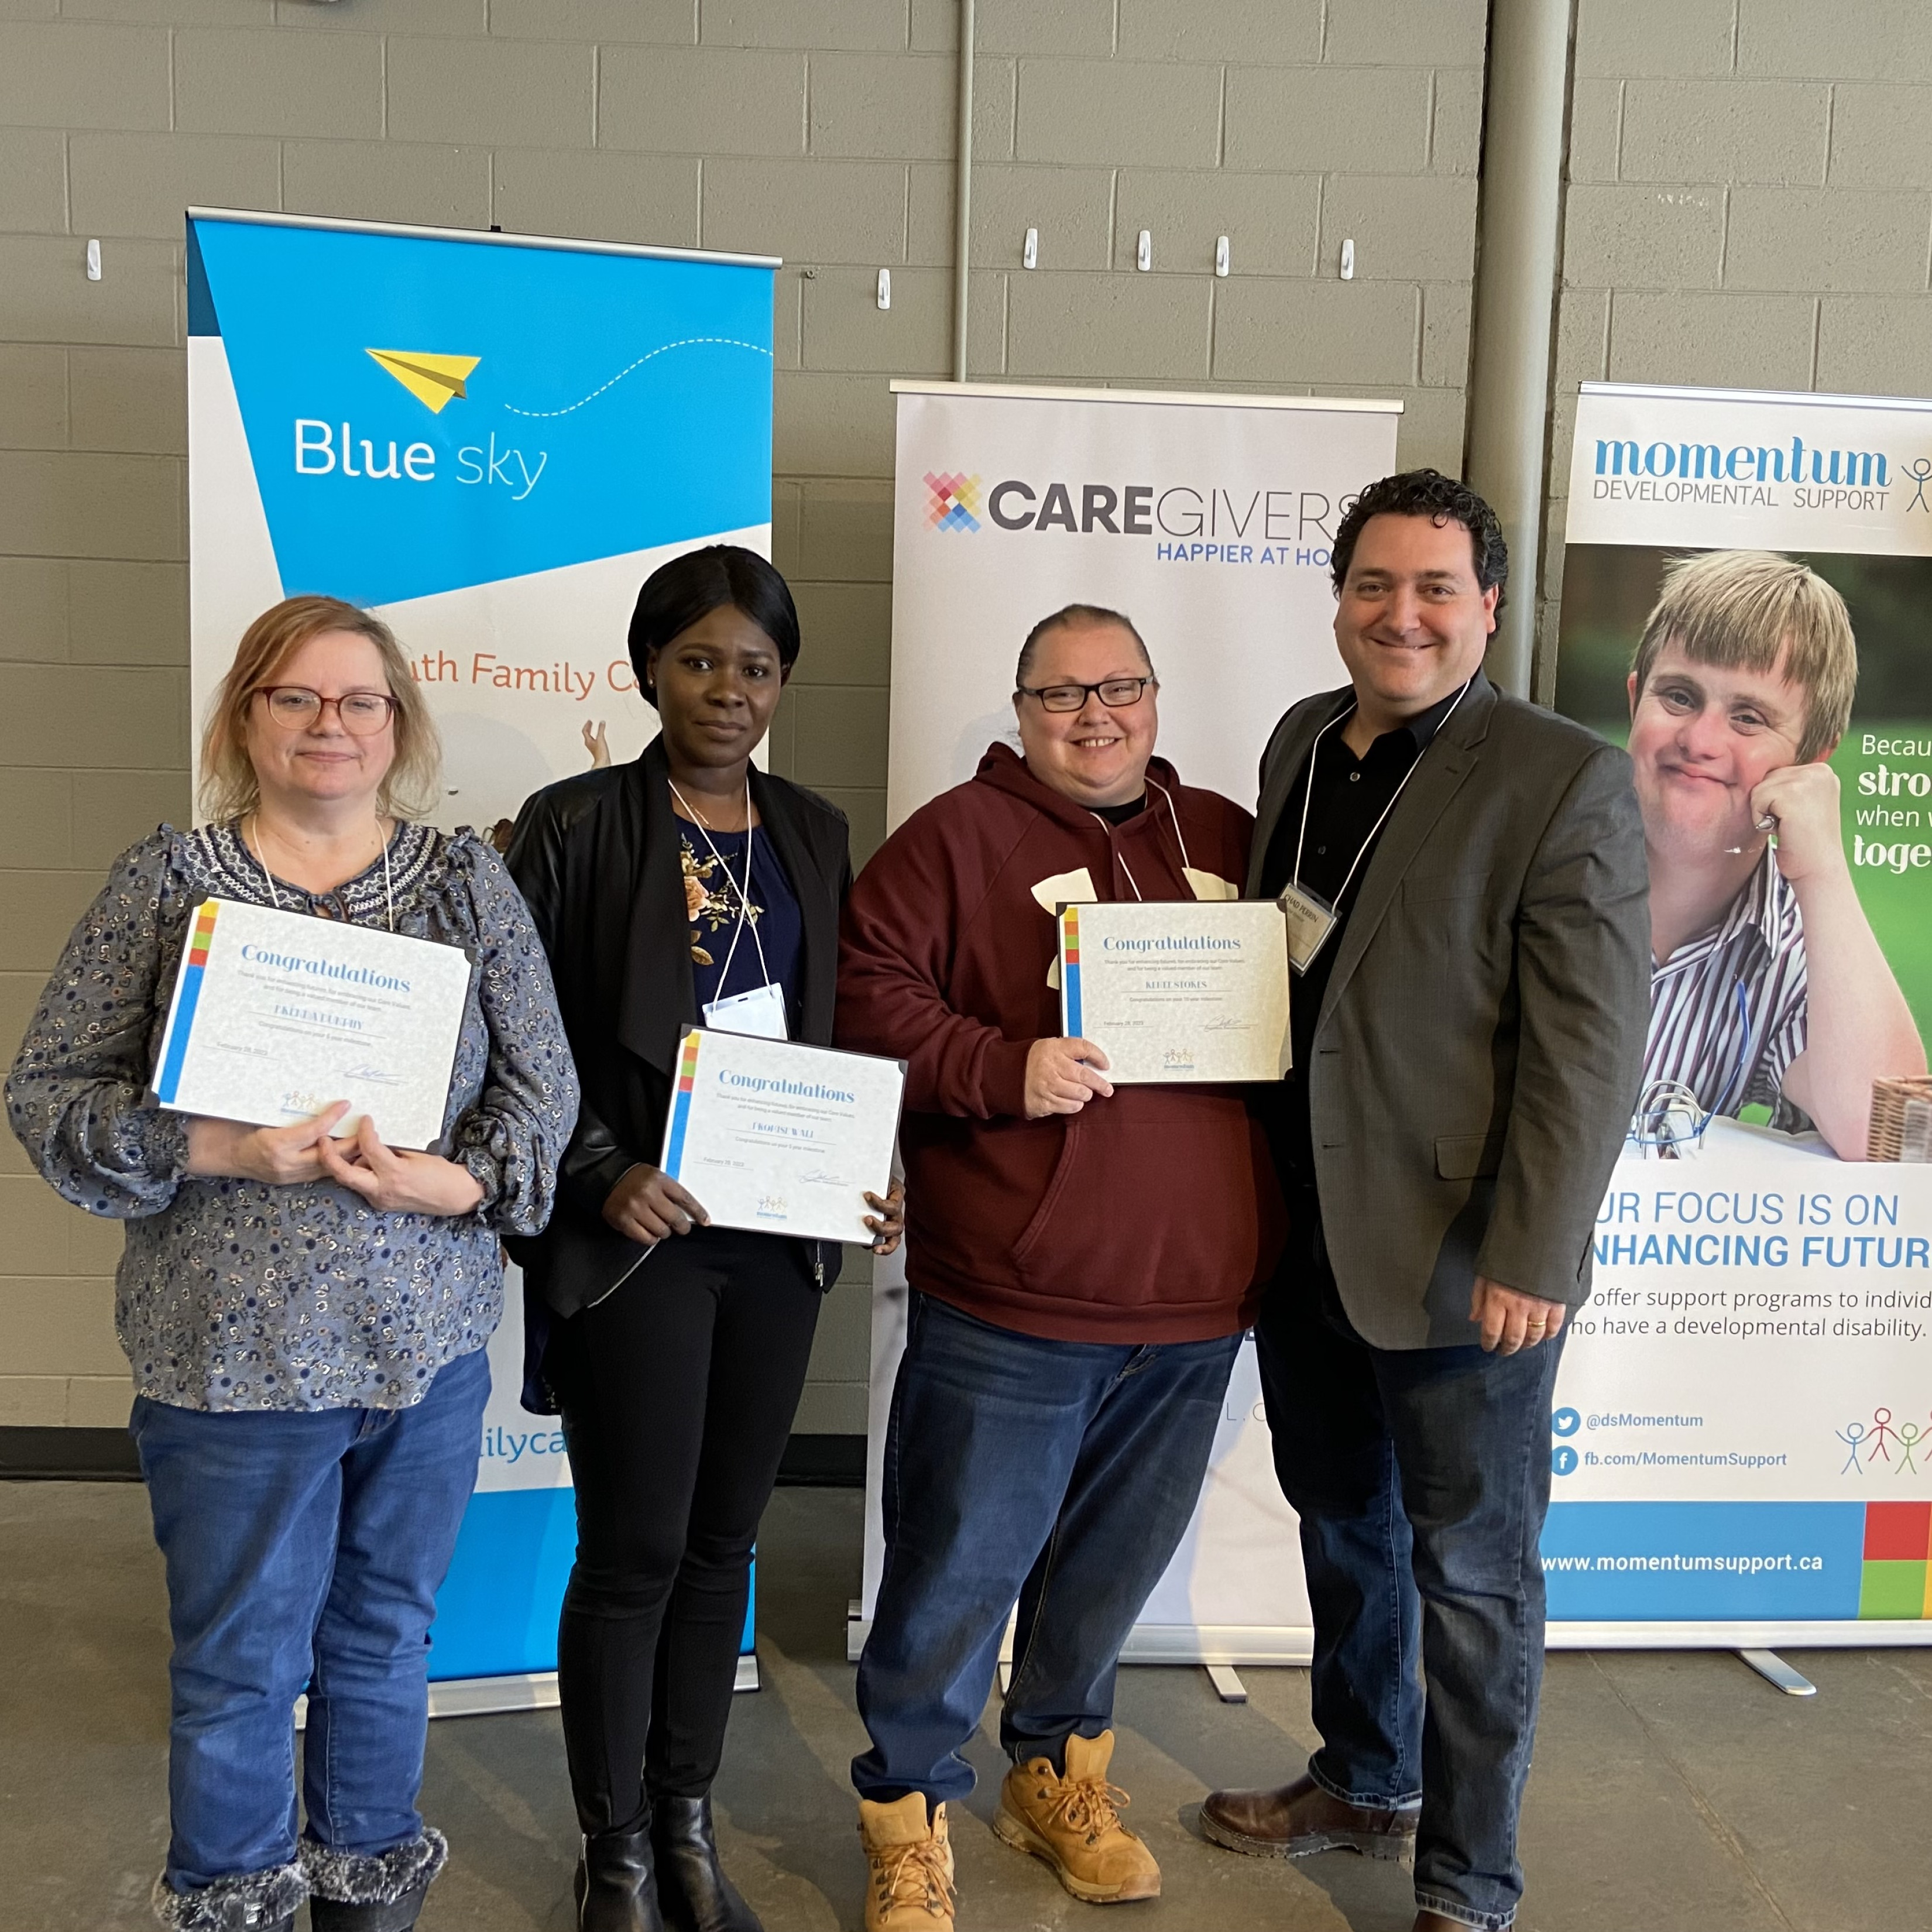 A group of four people hold up certifications in front of signage for Caregivers, Momentum, and Blue Sky.